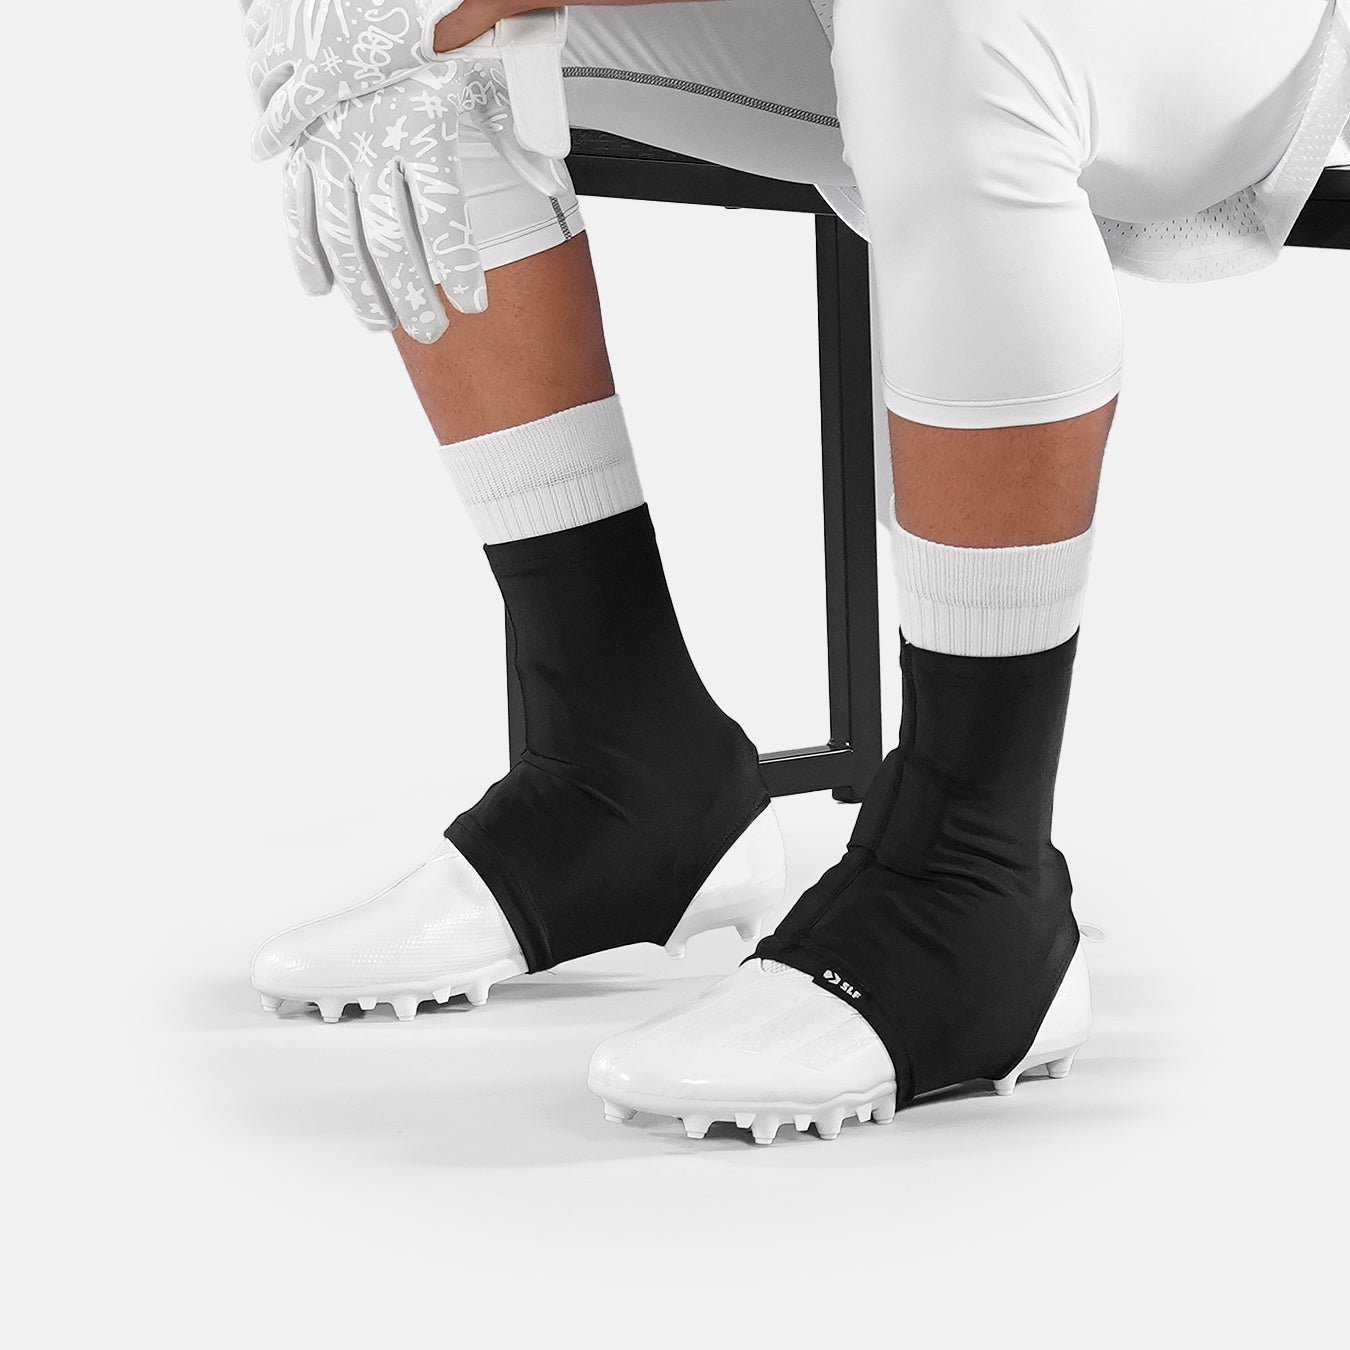 Basic Black Spats / Cleat Covers